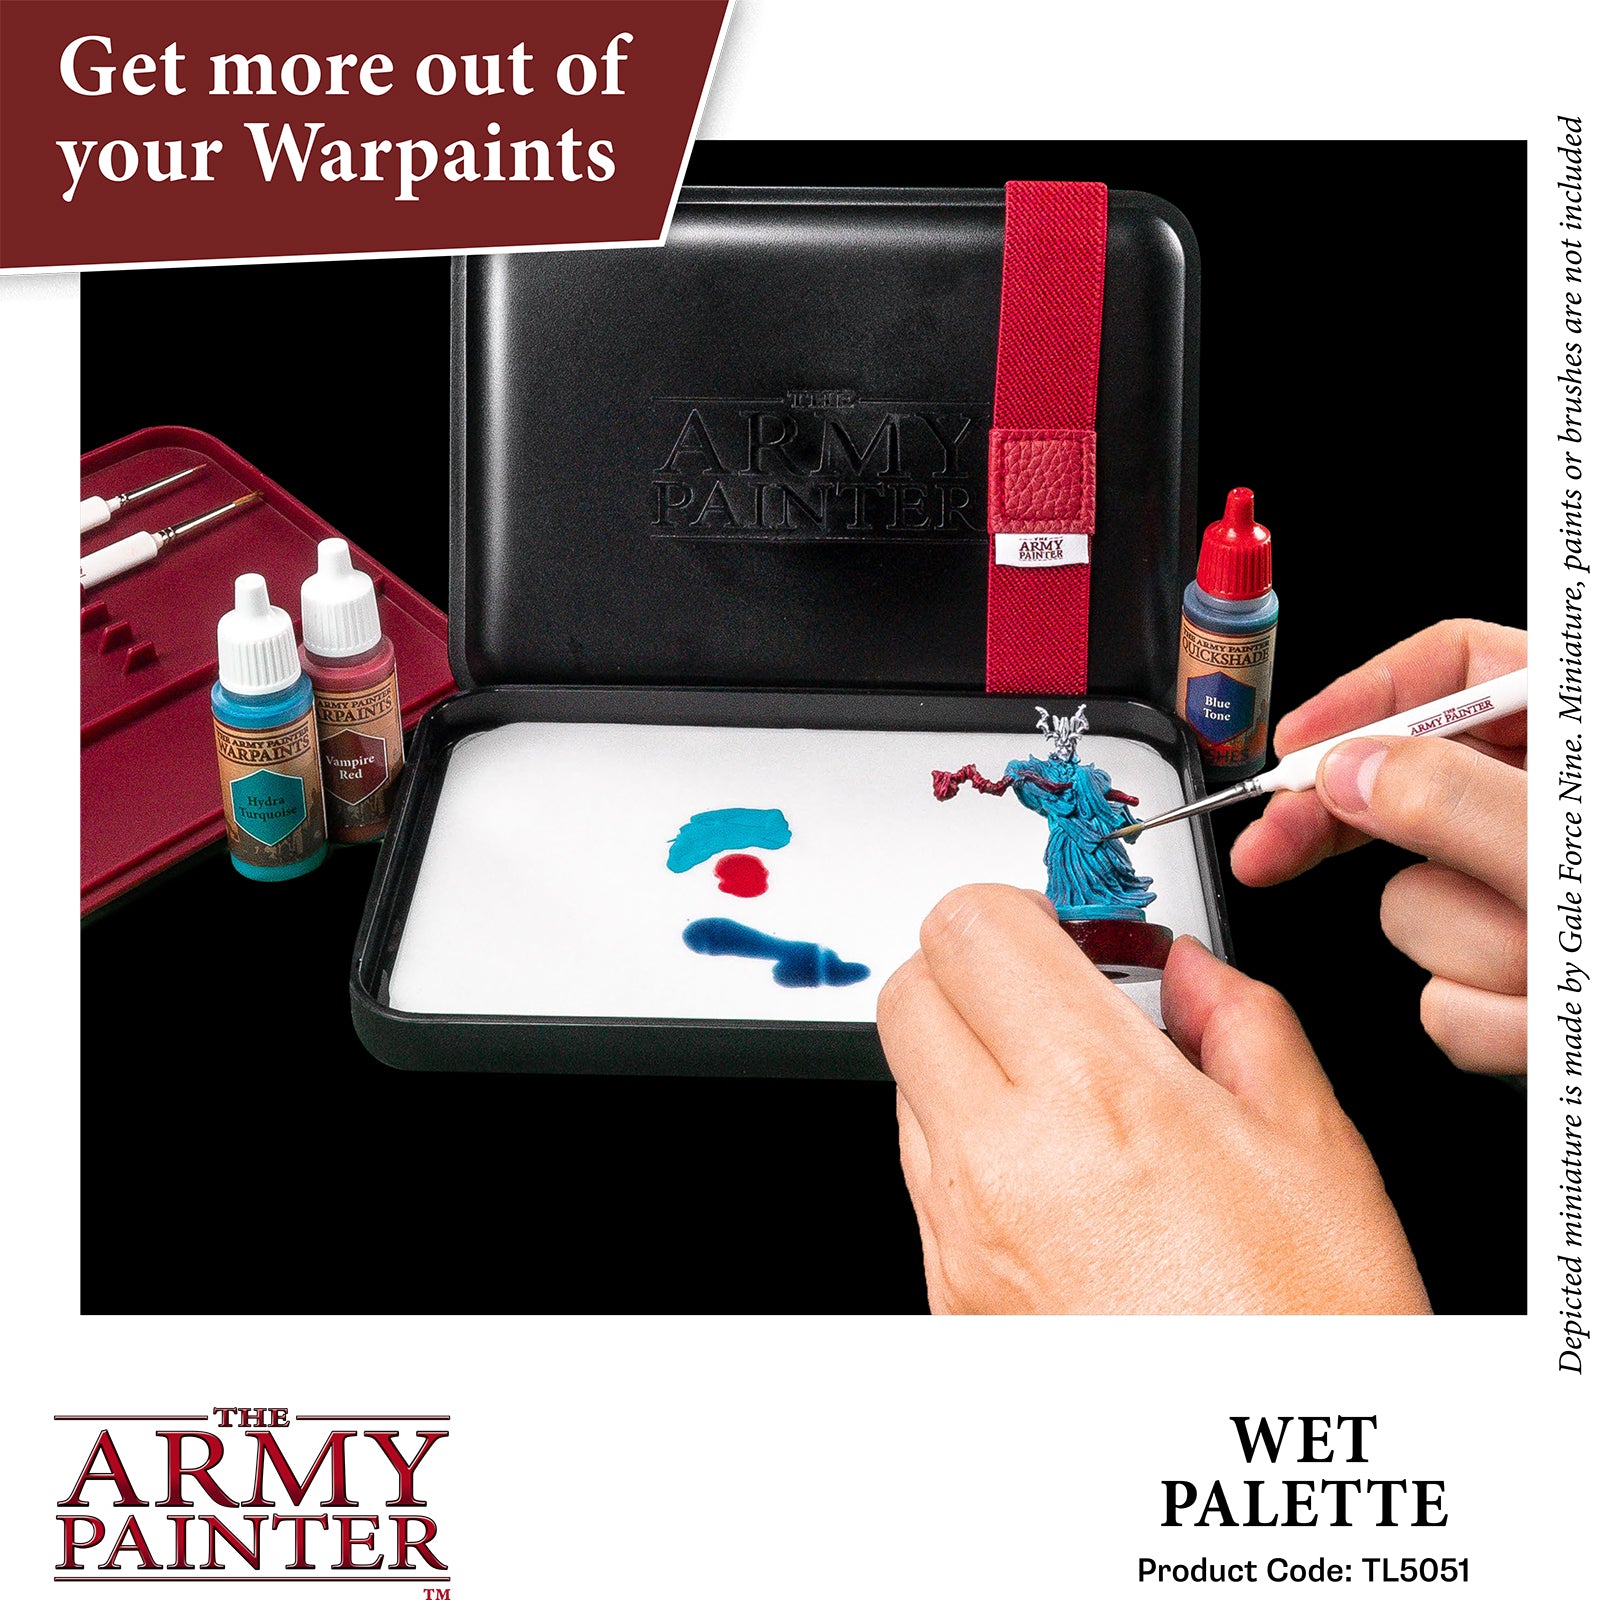 THE ARMY PAINTER WET PALETTE HYDRO PACK - The Art Store/Commercial Art  Supply